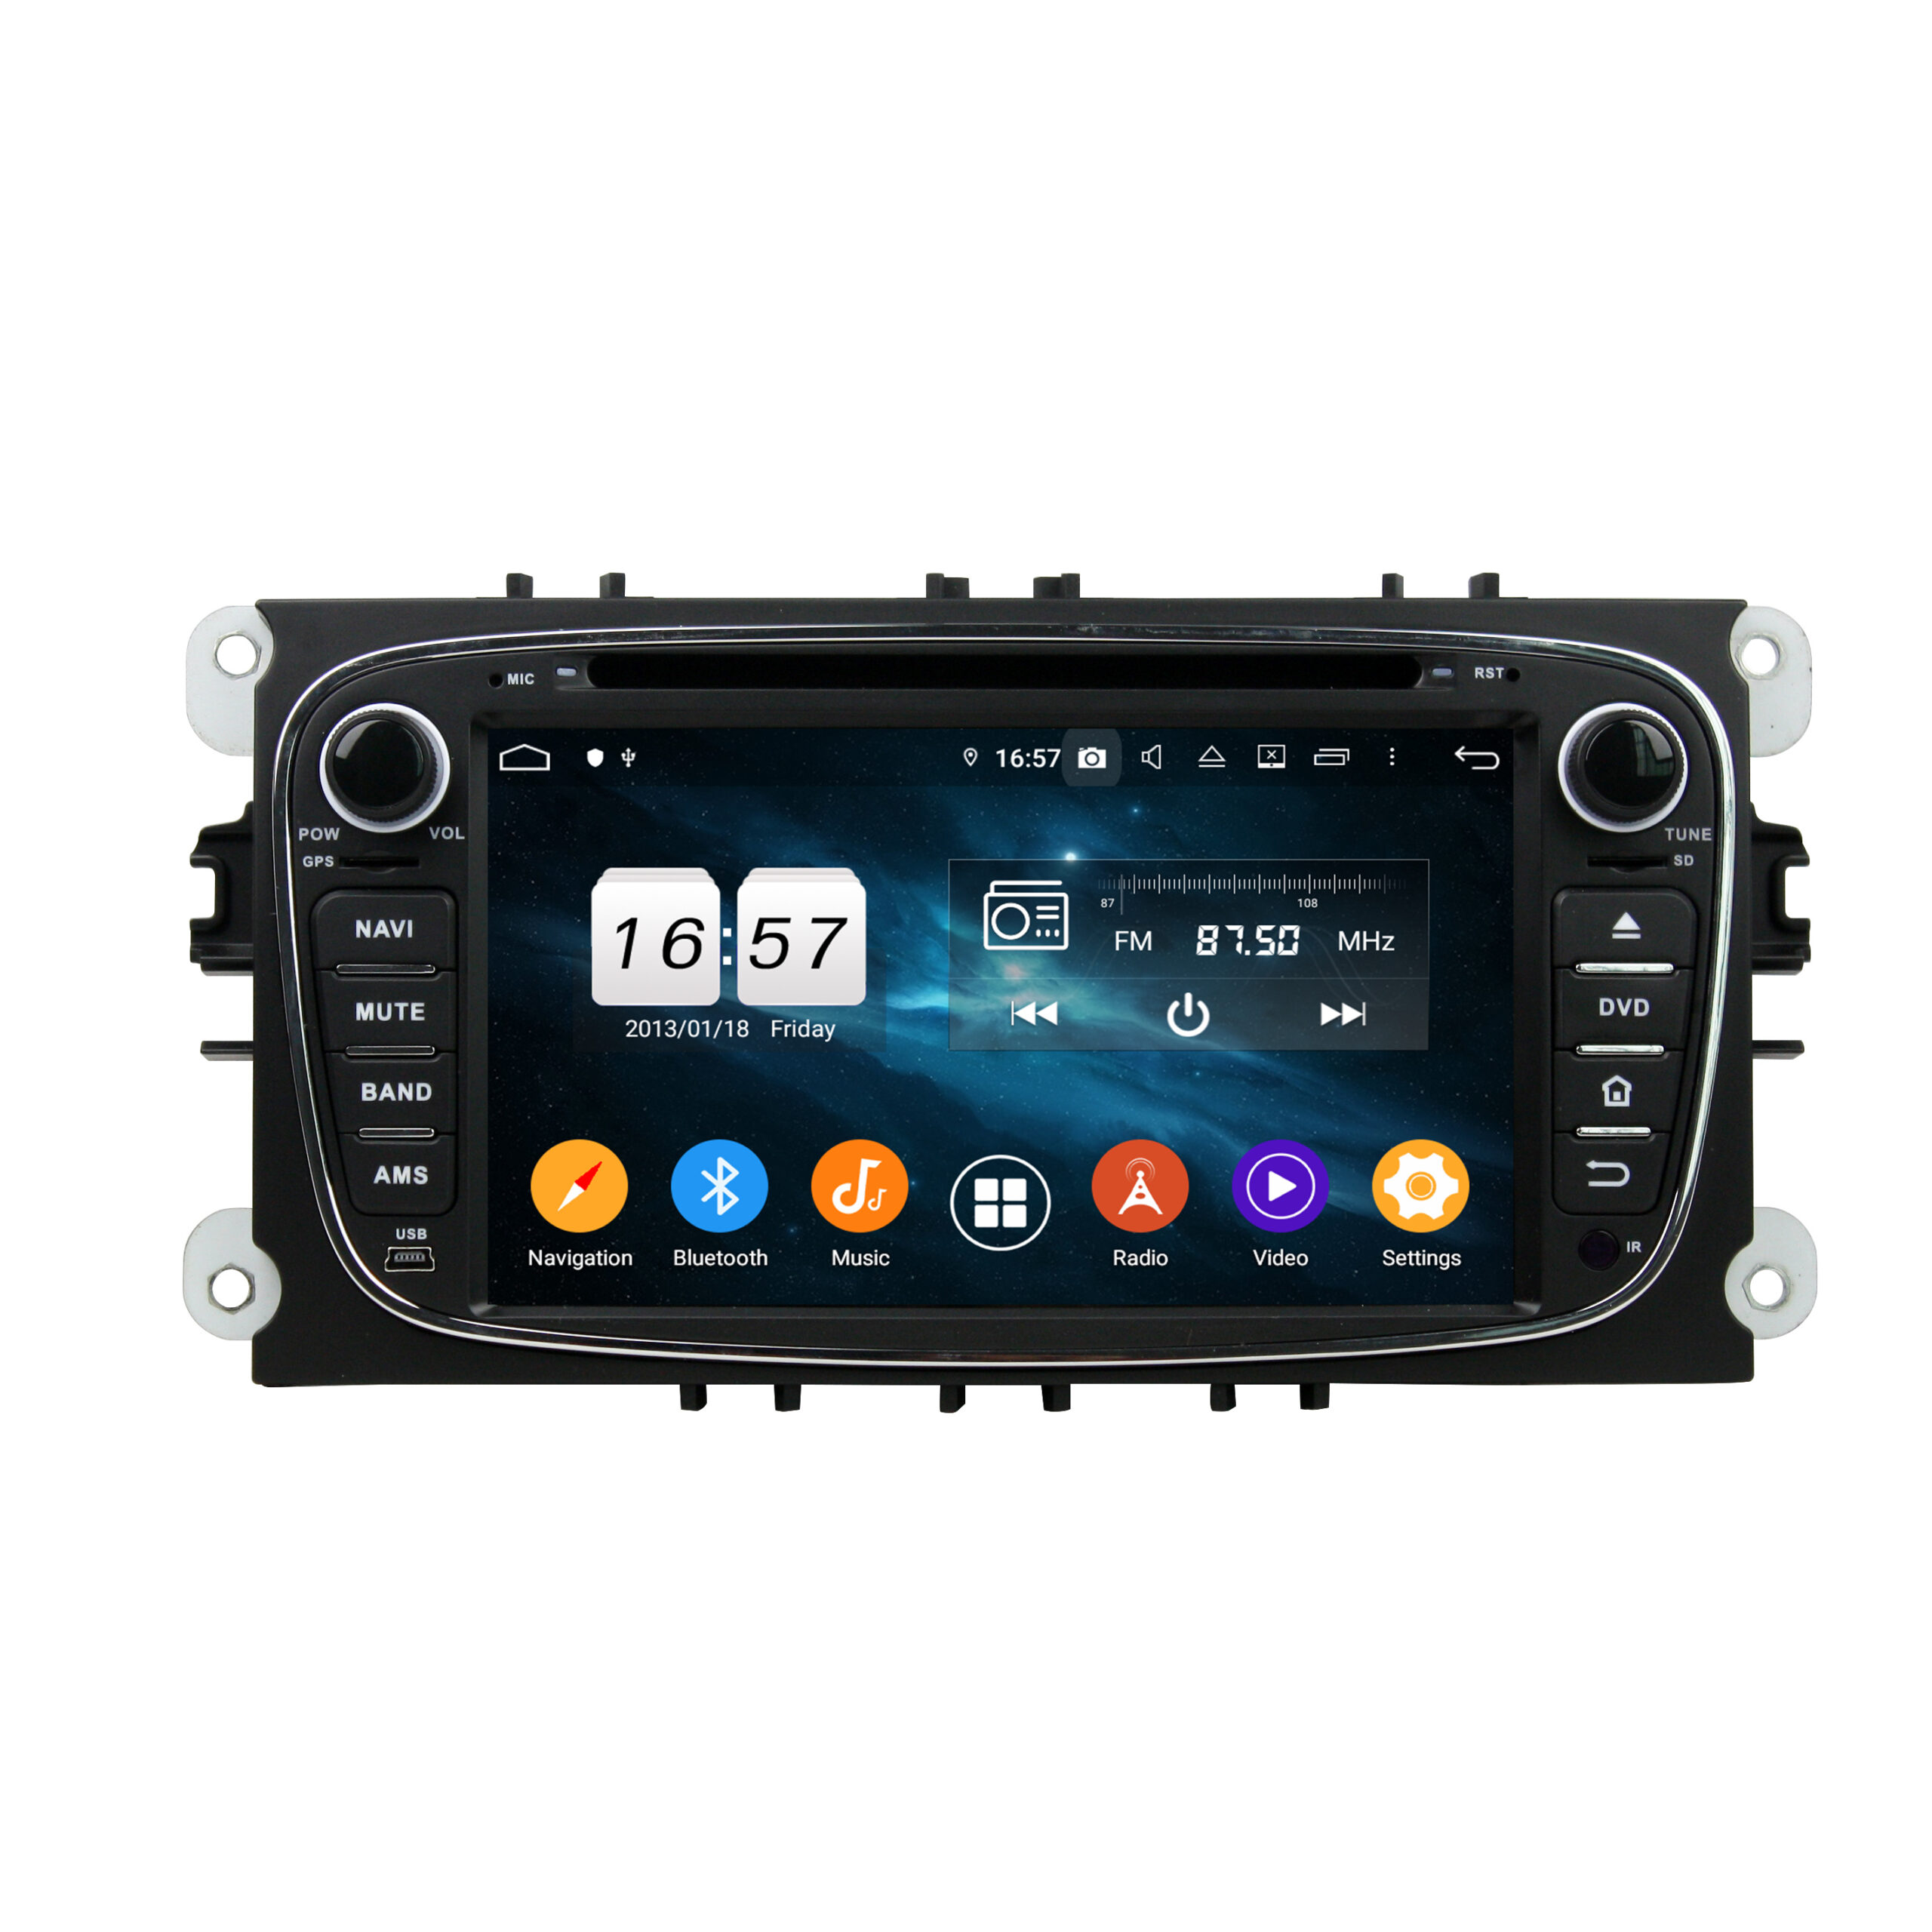 KD-7053 Car Stereo DVD Player With Bluetooth Capability For Ford Mondeo/Tourneo